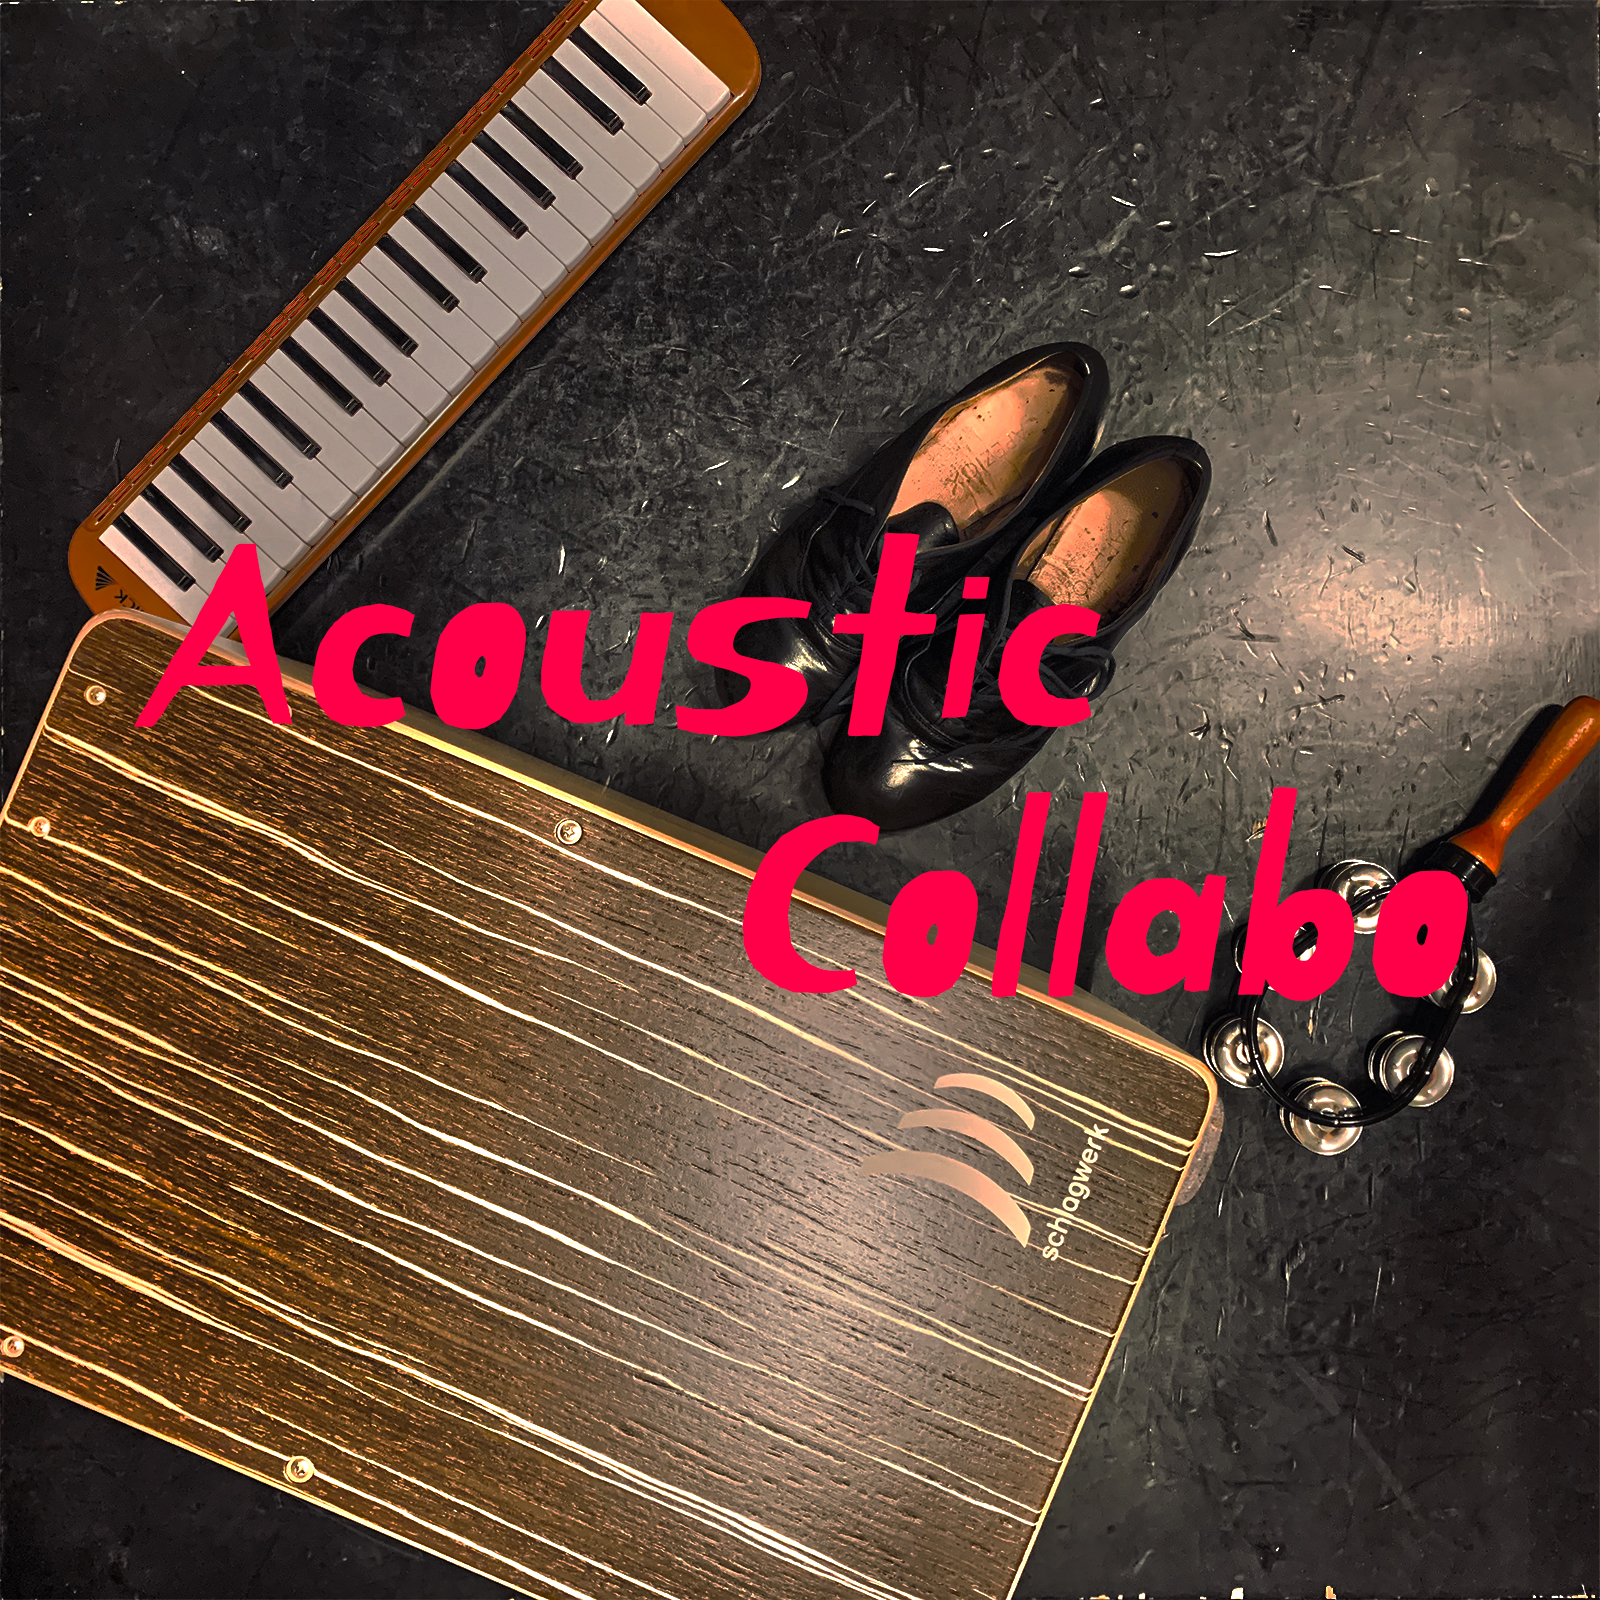 Acoustic Collabo